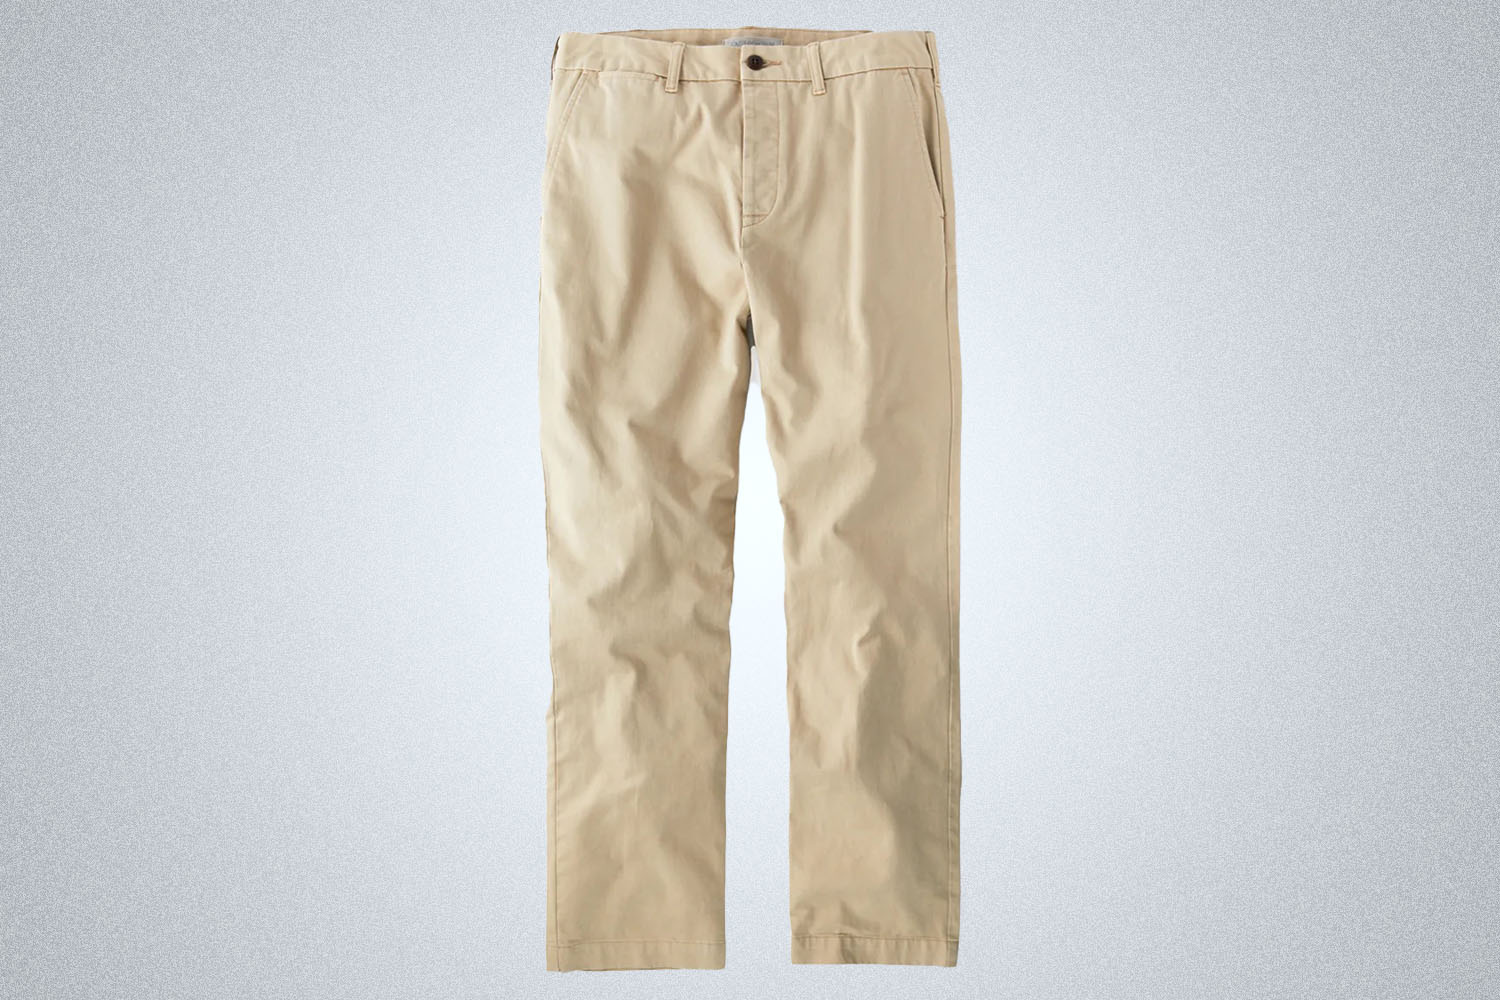 a pair of tan chinos from Outerknown on a grey background